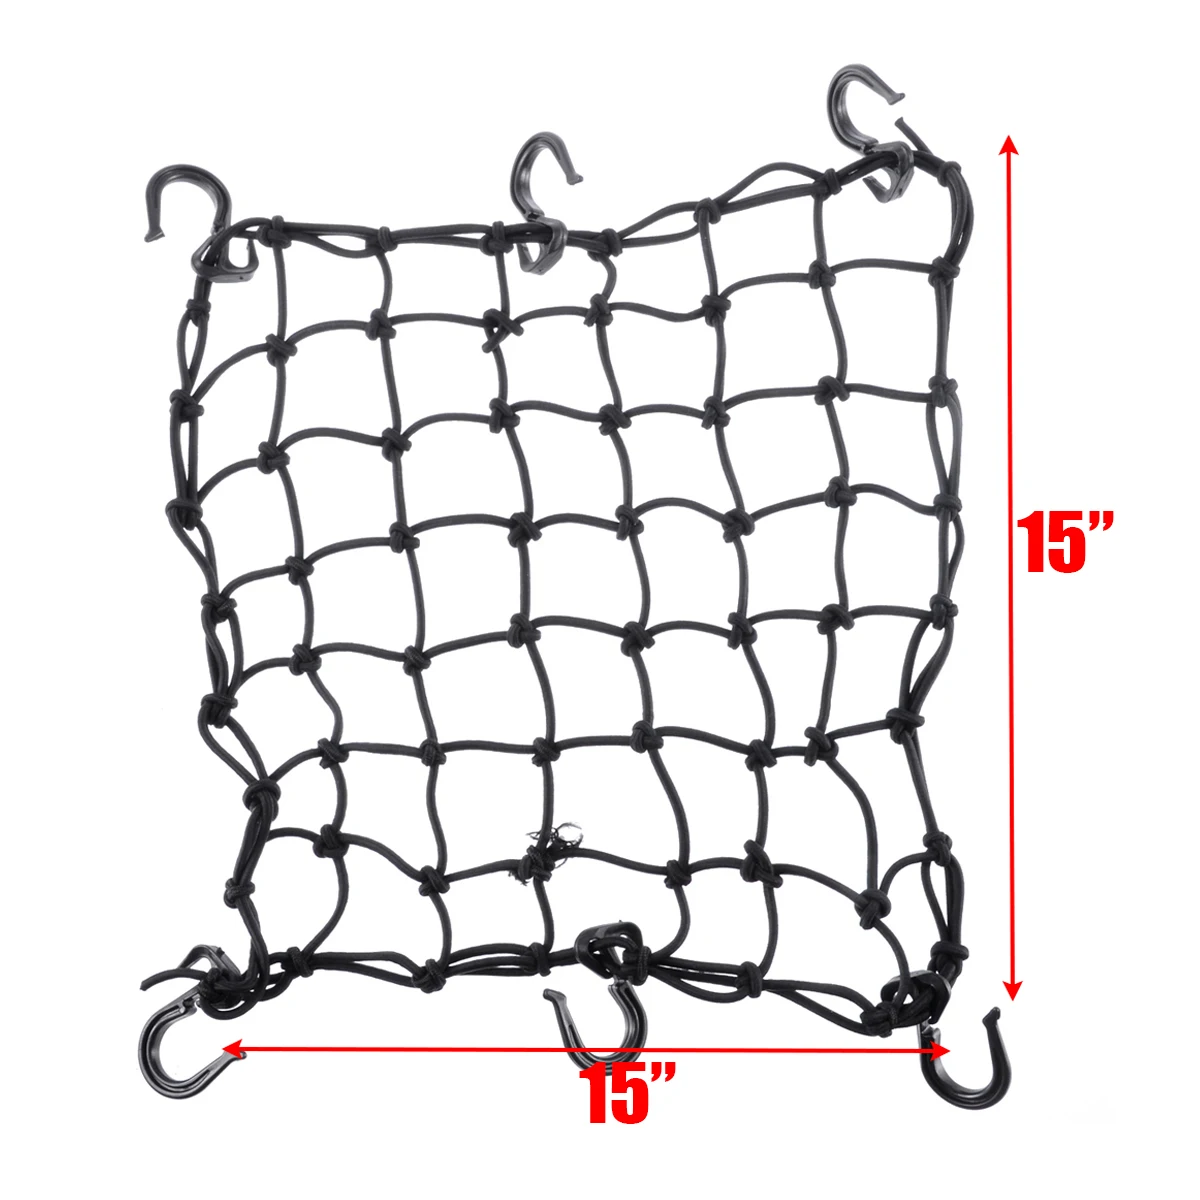 For Moto Bike Protective Gears 1PC Hold Down Helmet Cargo Luggage Protect Net Fuel Tank Mesh Web Organiser 6 Hook 15"x15"